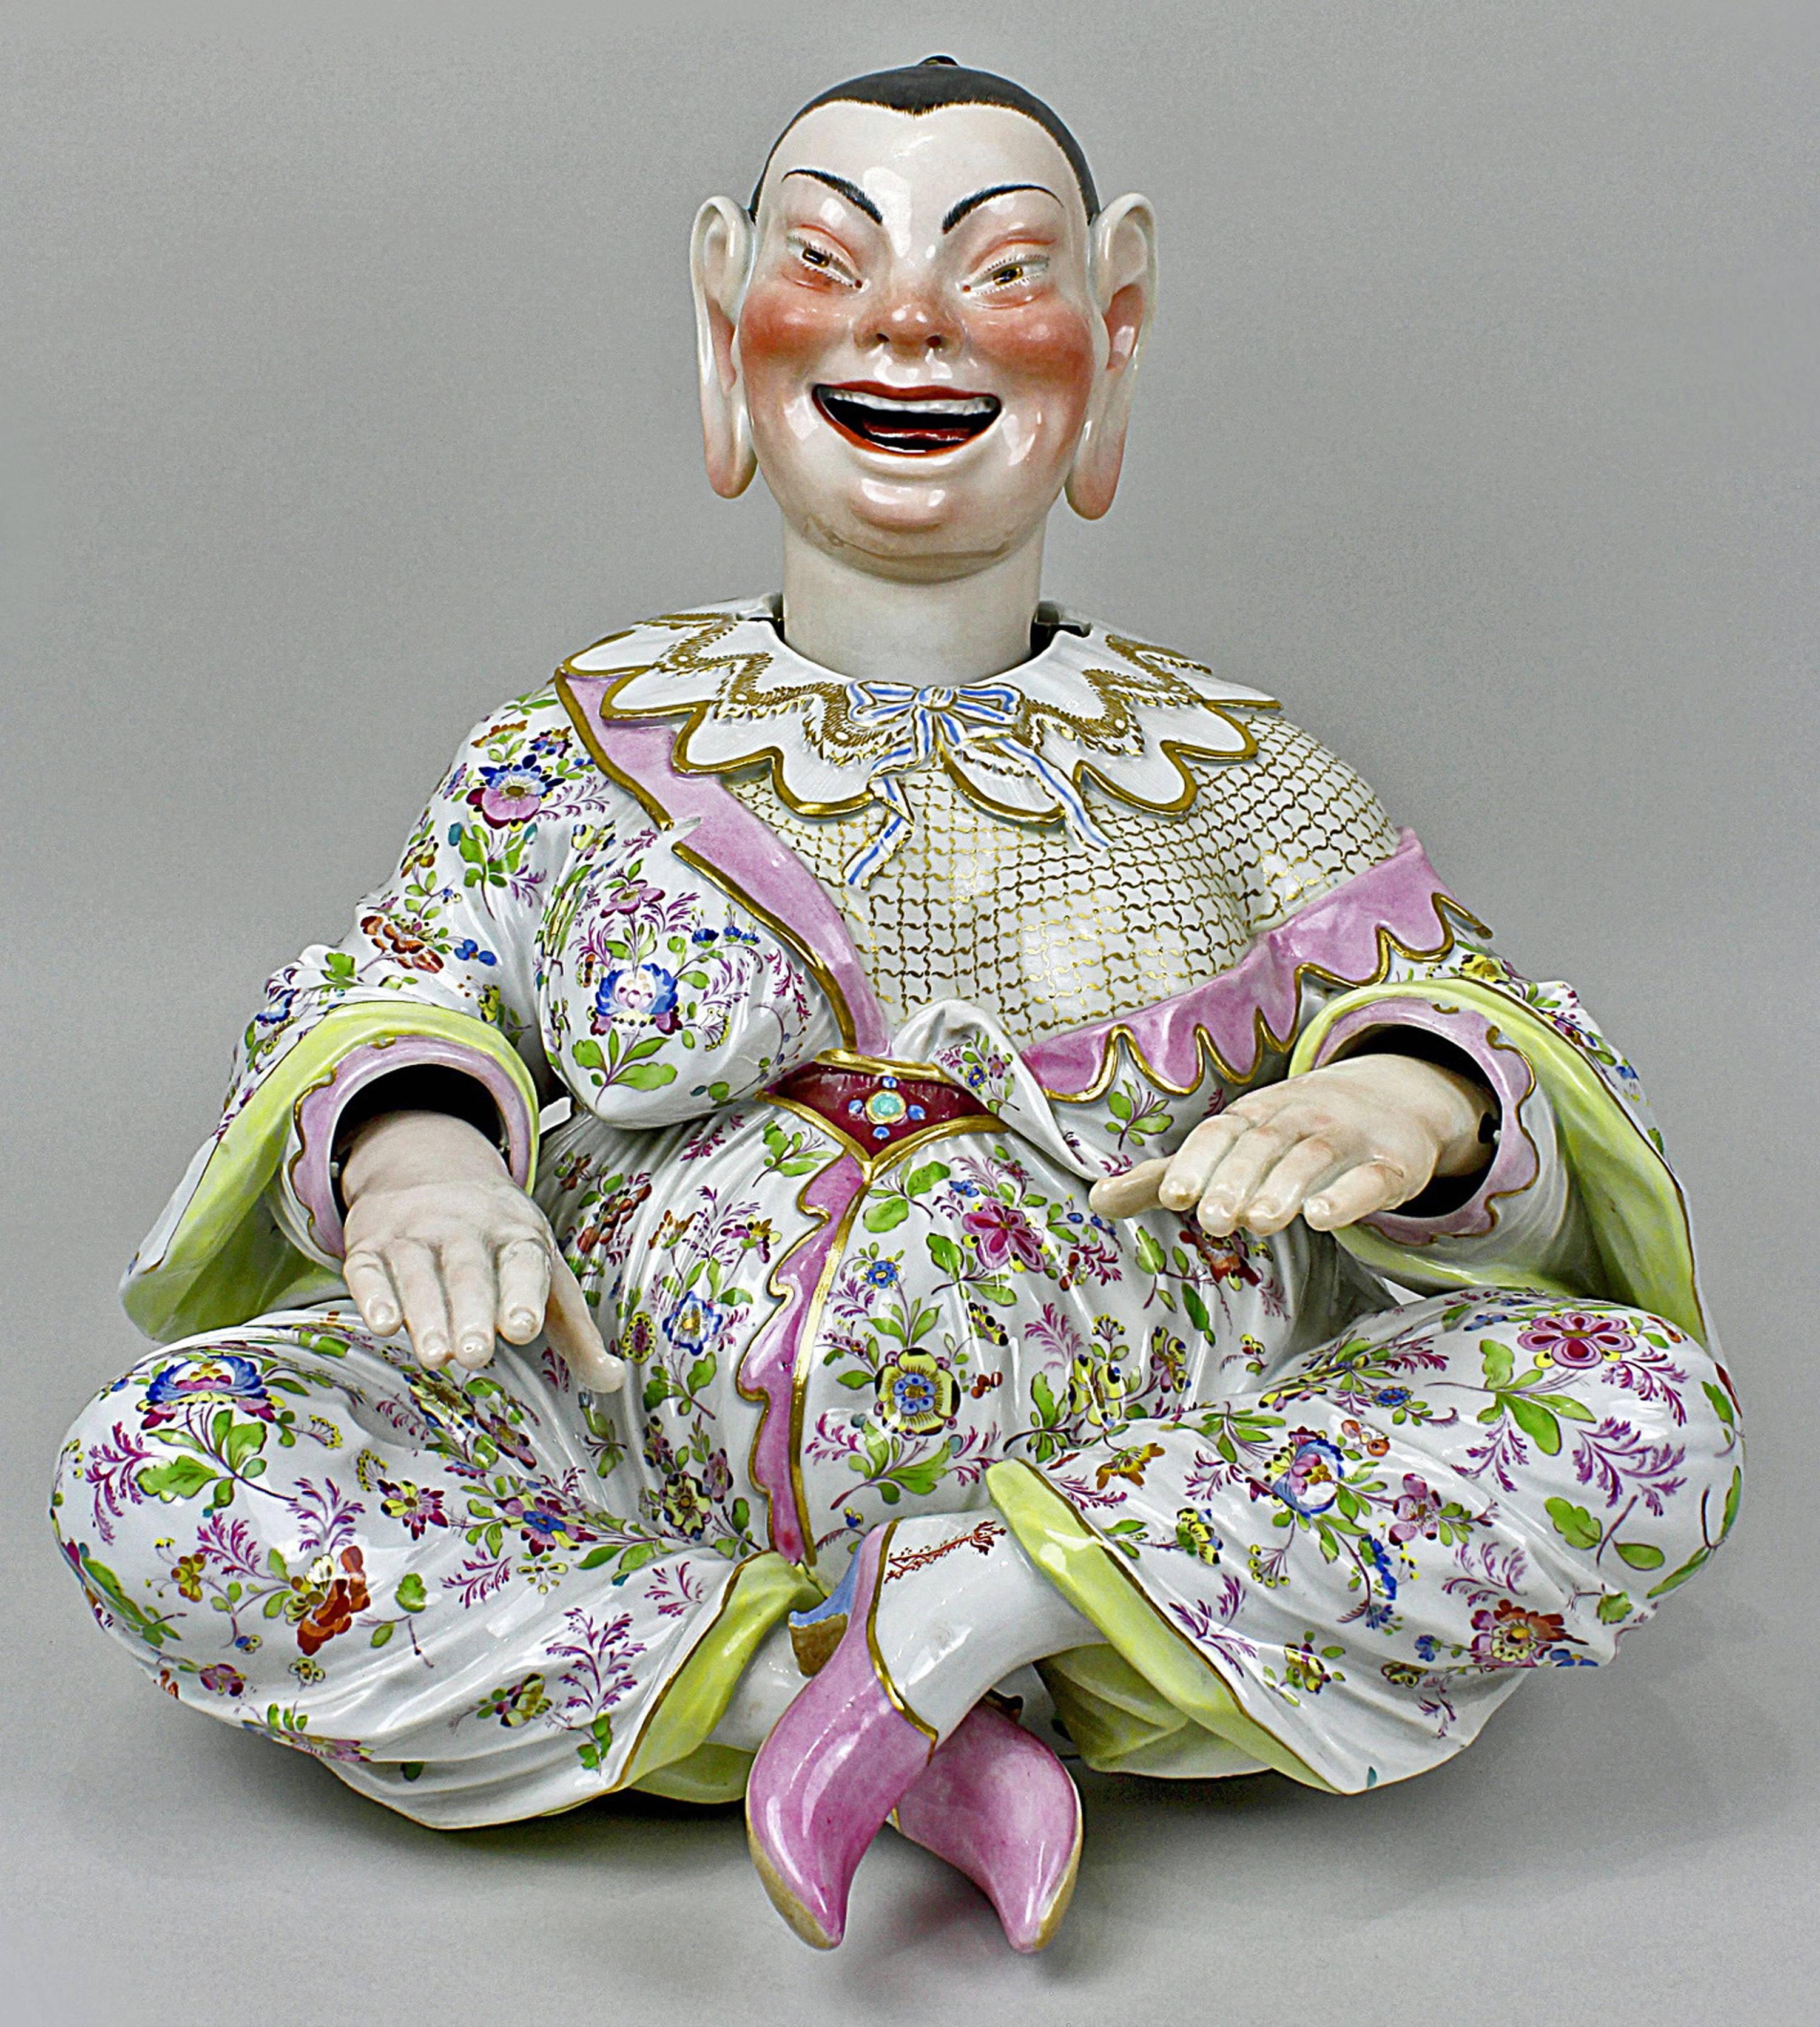 Meissen most remarkable items: Two Buddha figurines (male and female)
Attention: The Buddha figurines have movable hands, head and tongue.

Measures / Dimensions:
height: 12.59 inches / 32.0 cm 
width: 12.79 inches / 32.5 cm 
depth: 12.59